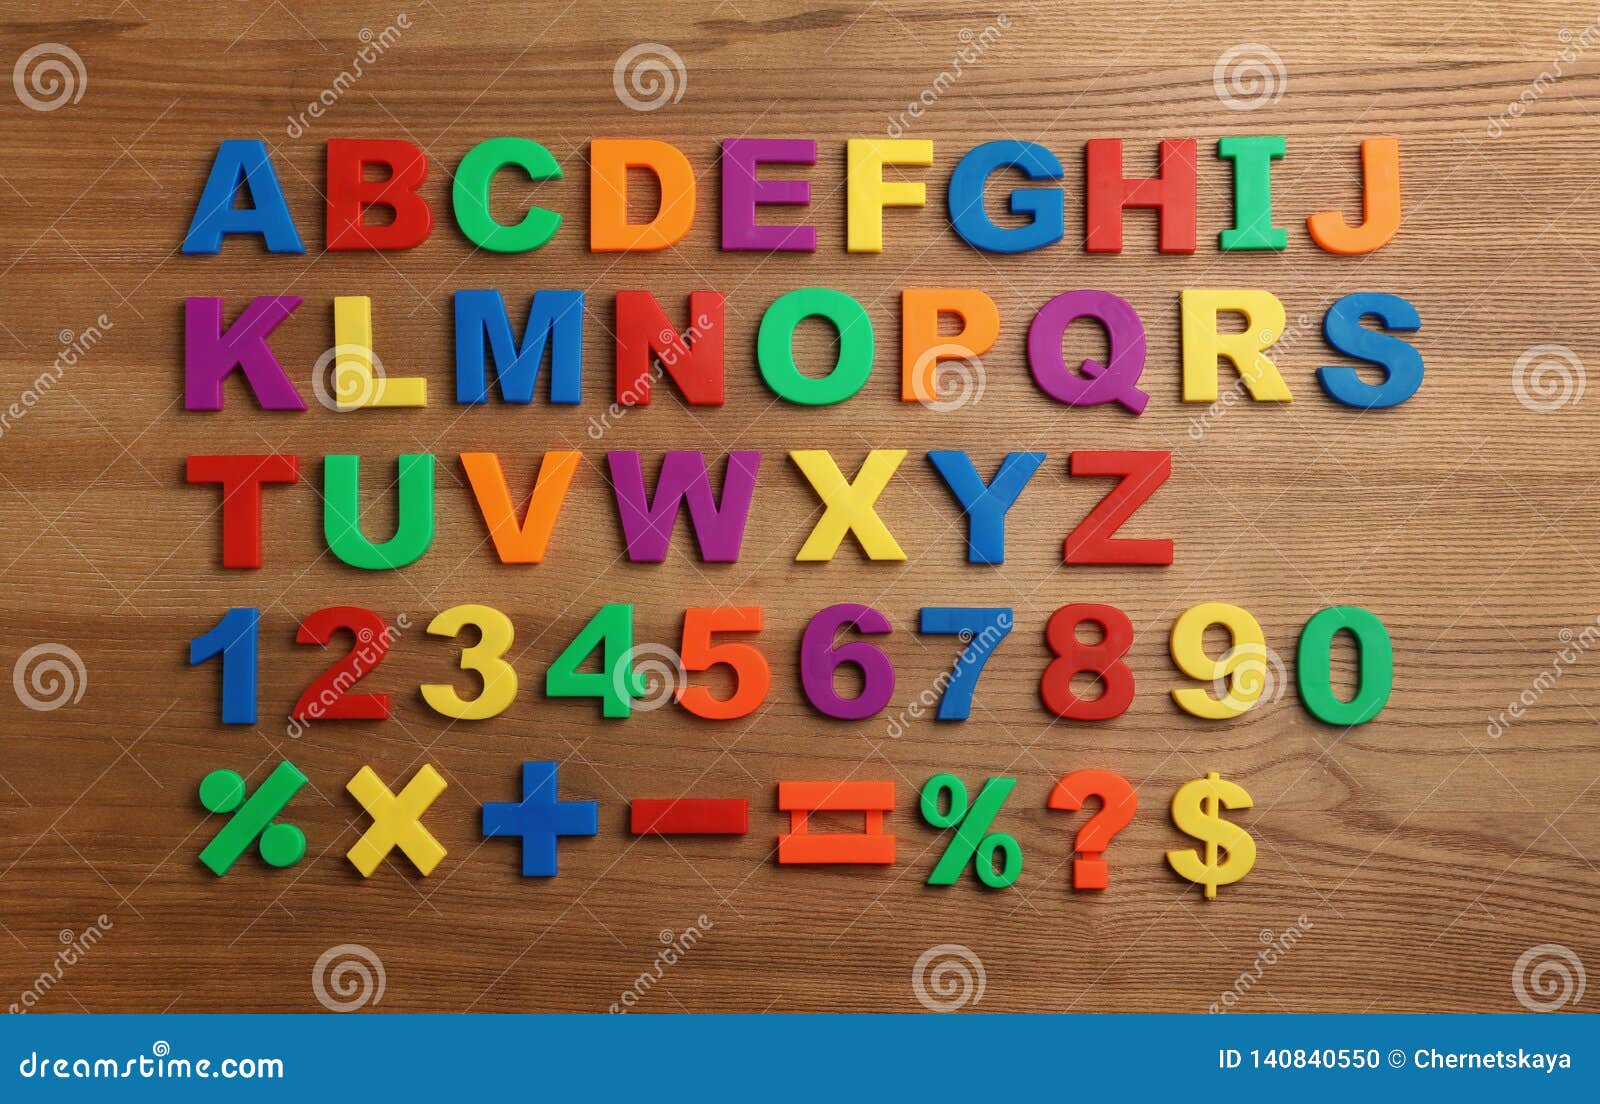 Plastic Magnetic Letters, Numbers and Math Symbols on Wooden Background  Stock Photo - Image of education, symbols: 140840550